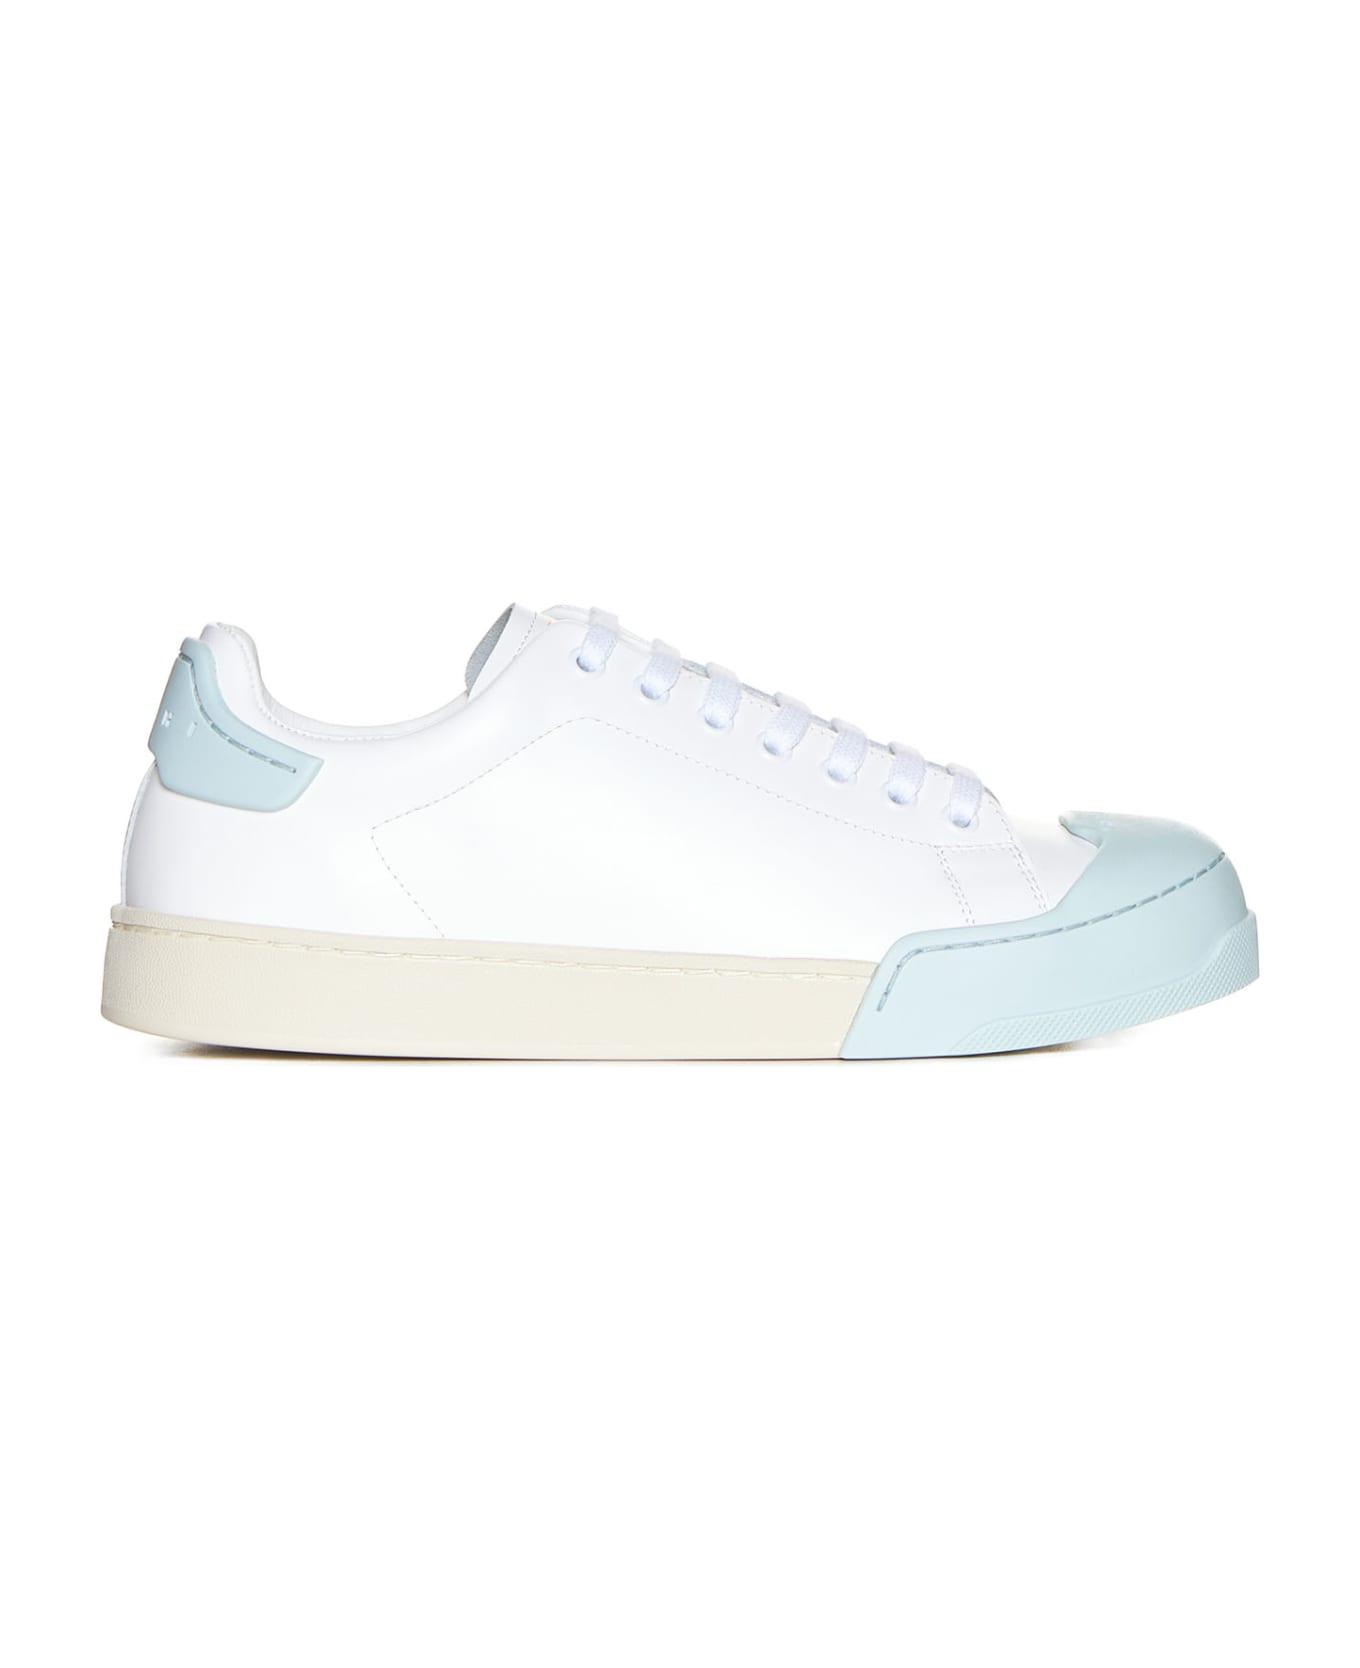 Marni Sneakers - Lily white/mineral ice スニーカー